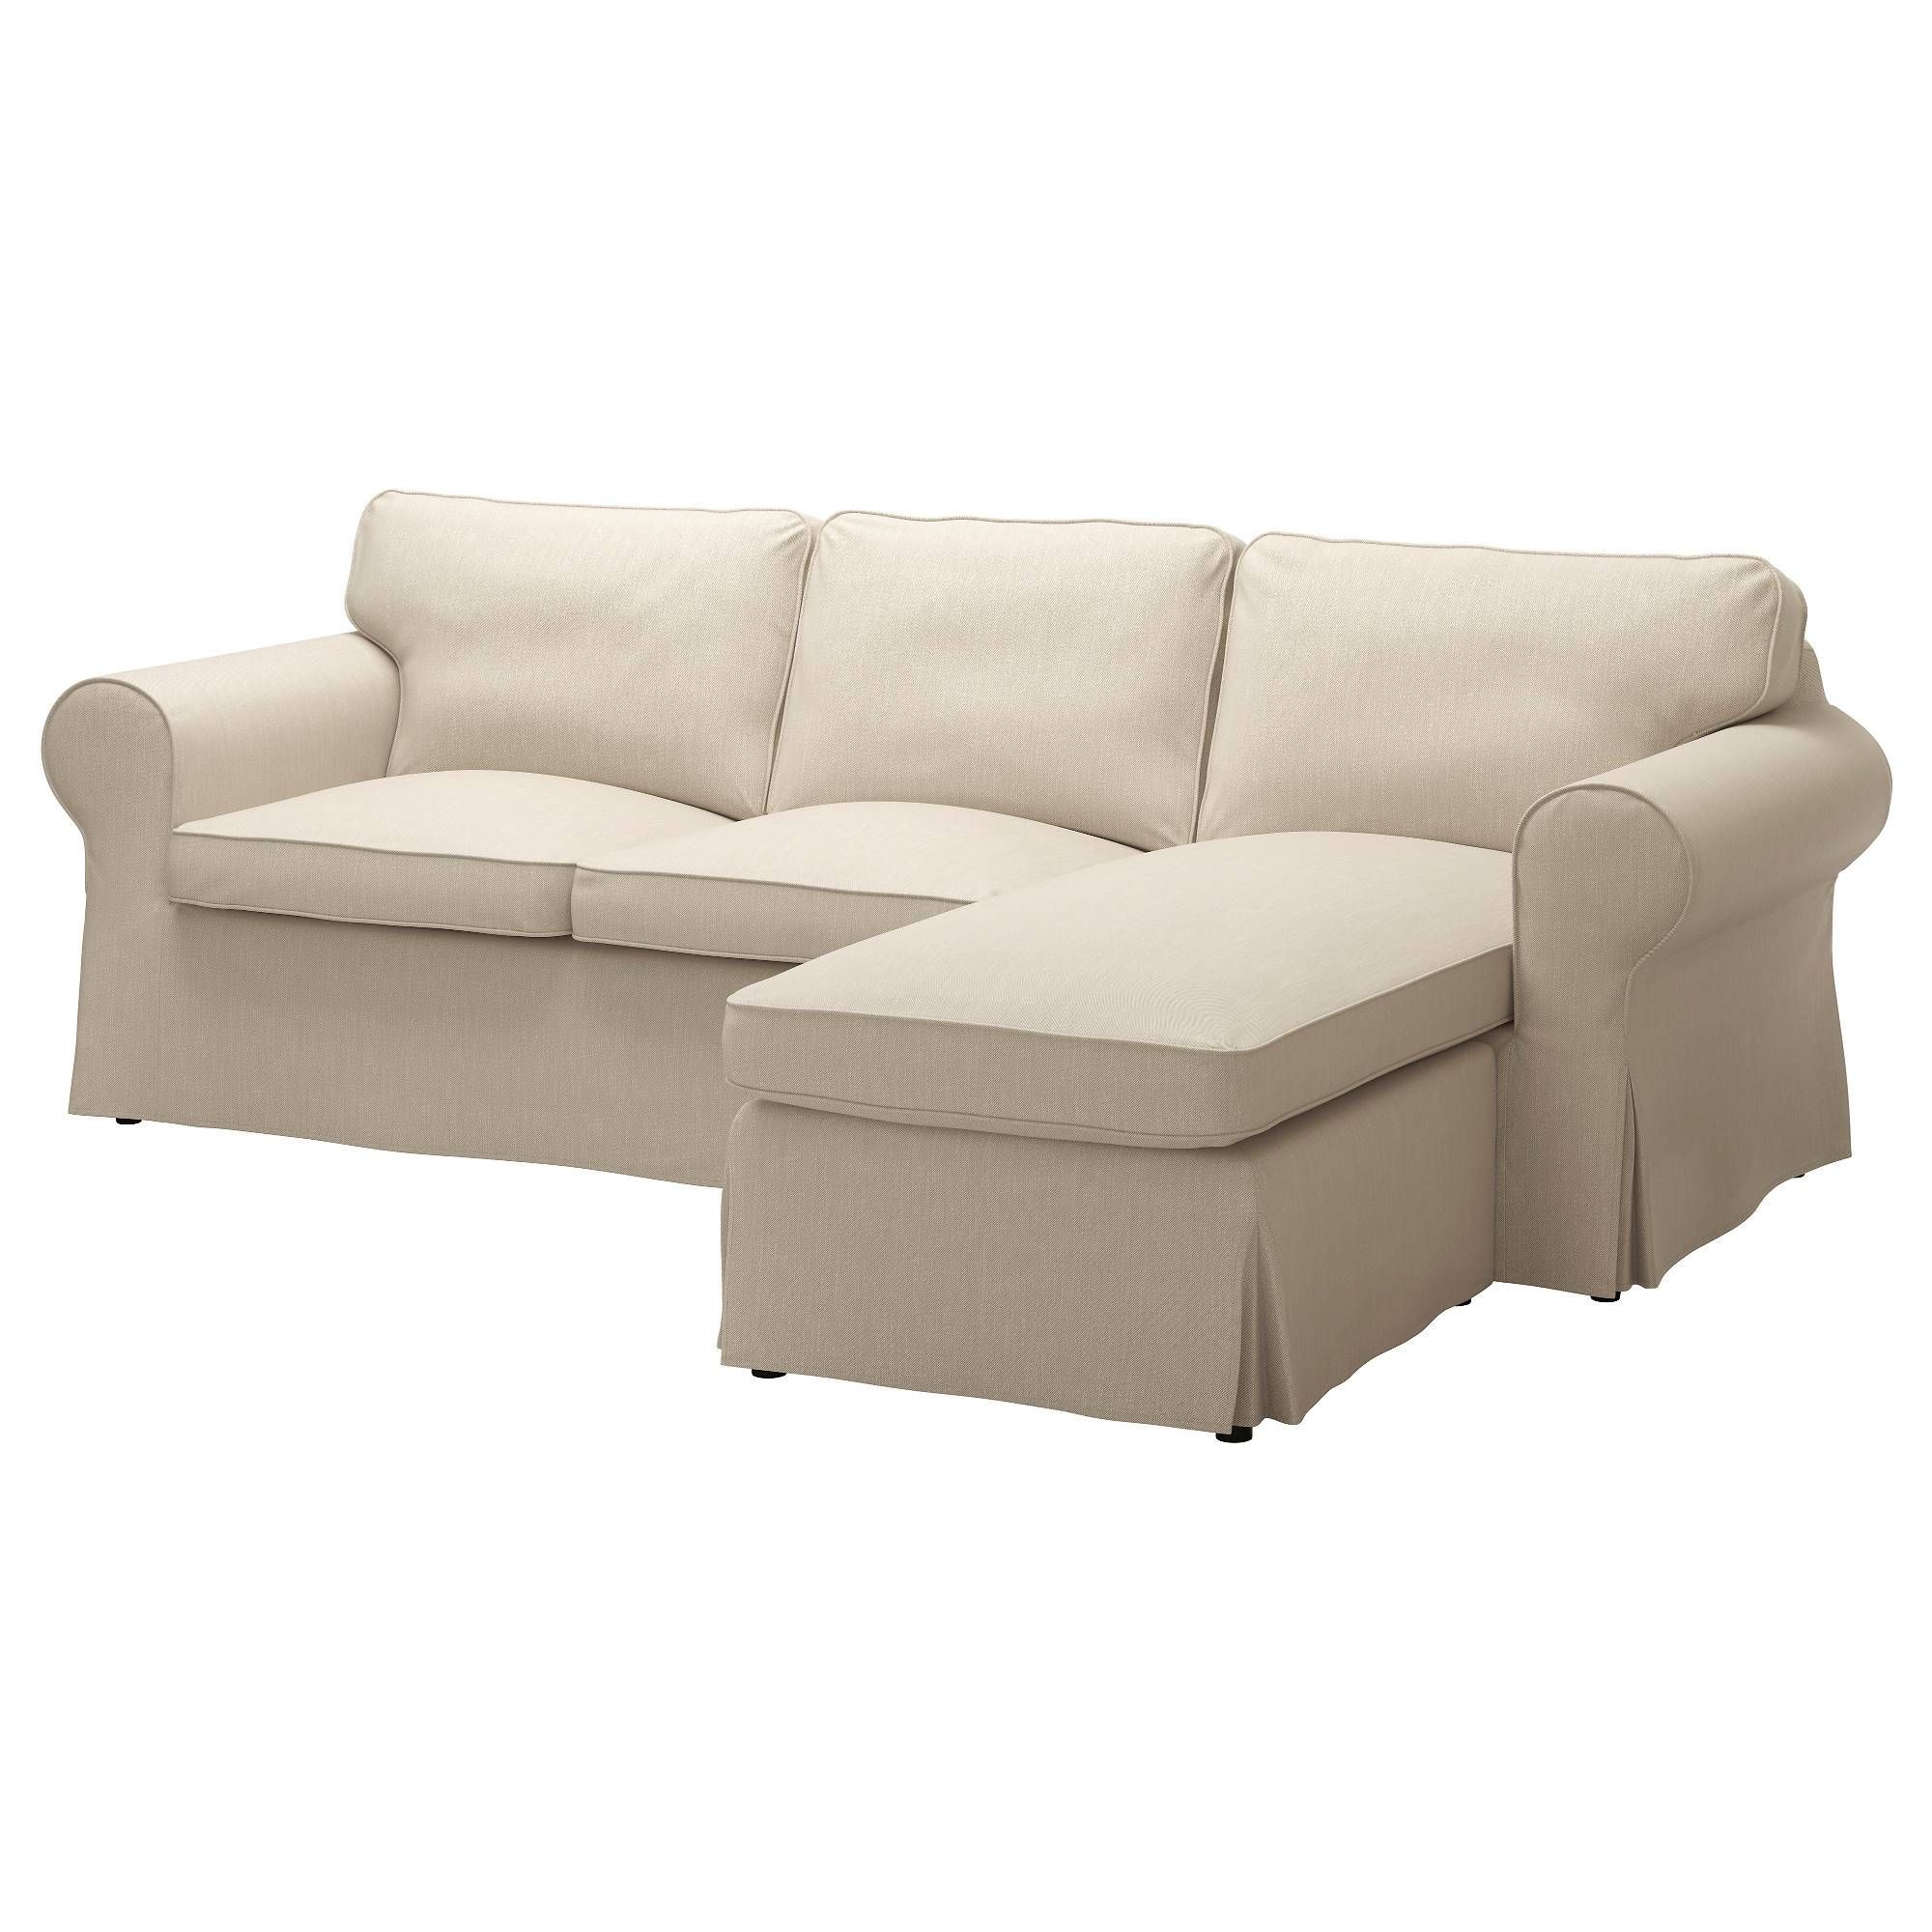 Ektorp Two Seat Sofa And Chaise Longue Nordvalla Dark Beige – Ikea Intended For Ikea Two Seater Sofas (View 14 of 30)